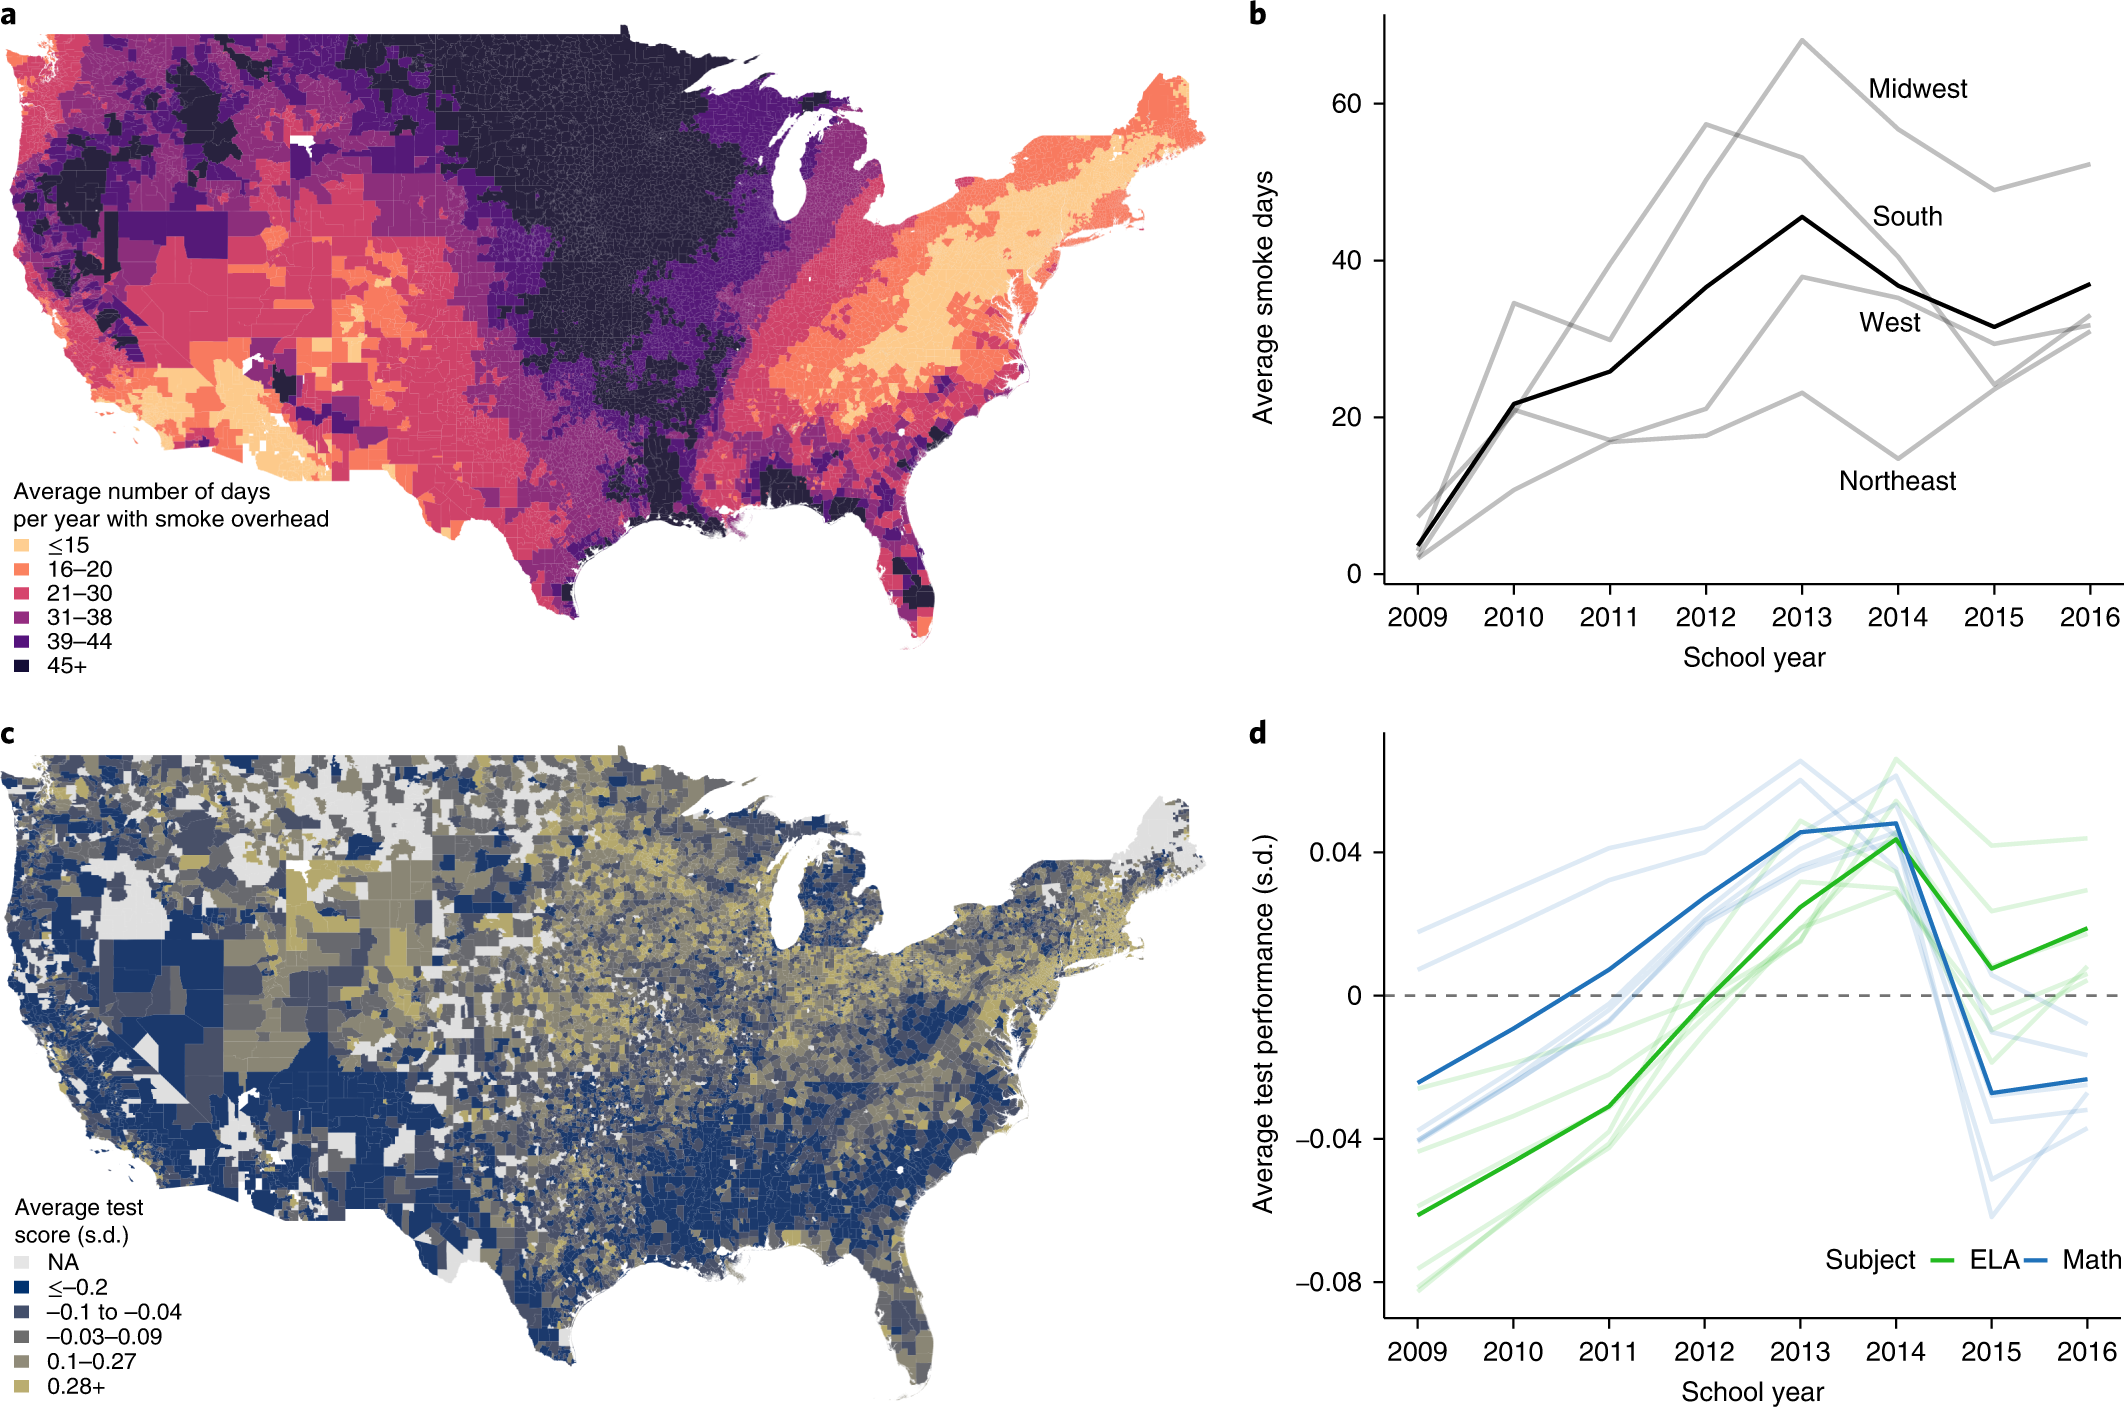 Lower test scores from wildfire smoke exposure | Nature Sustainability